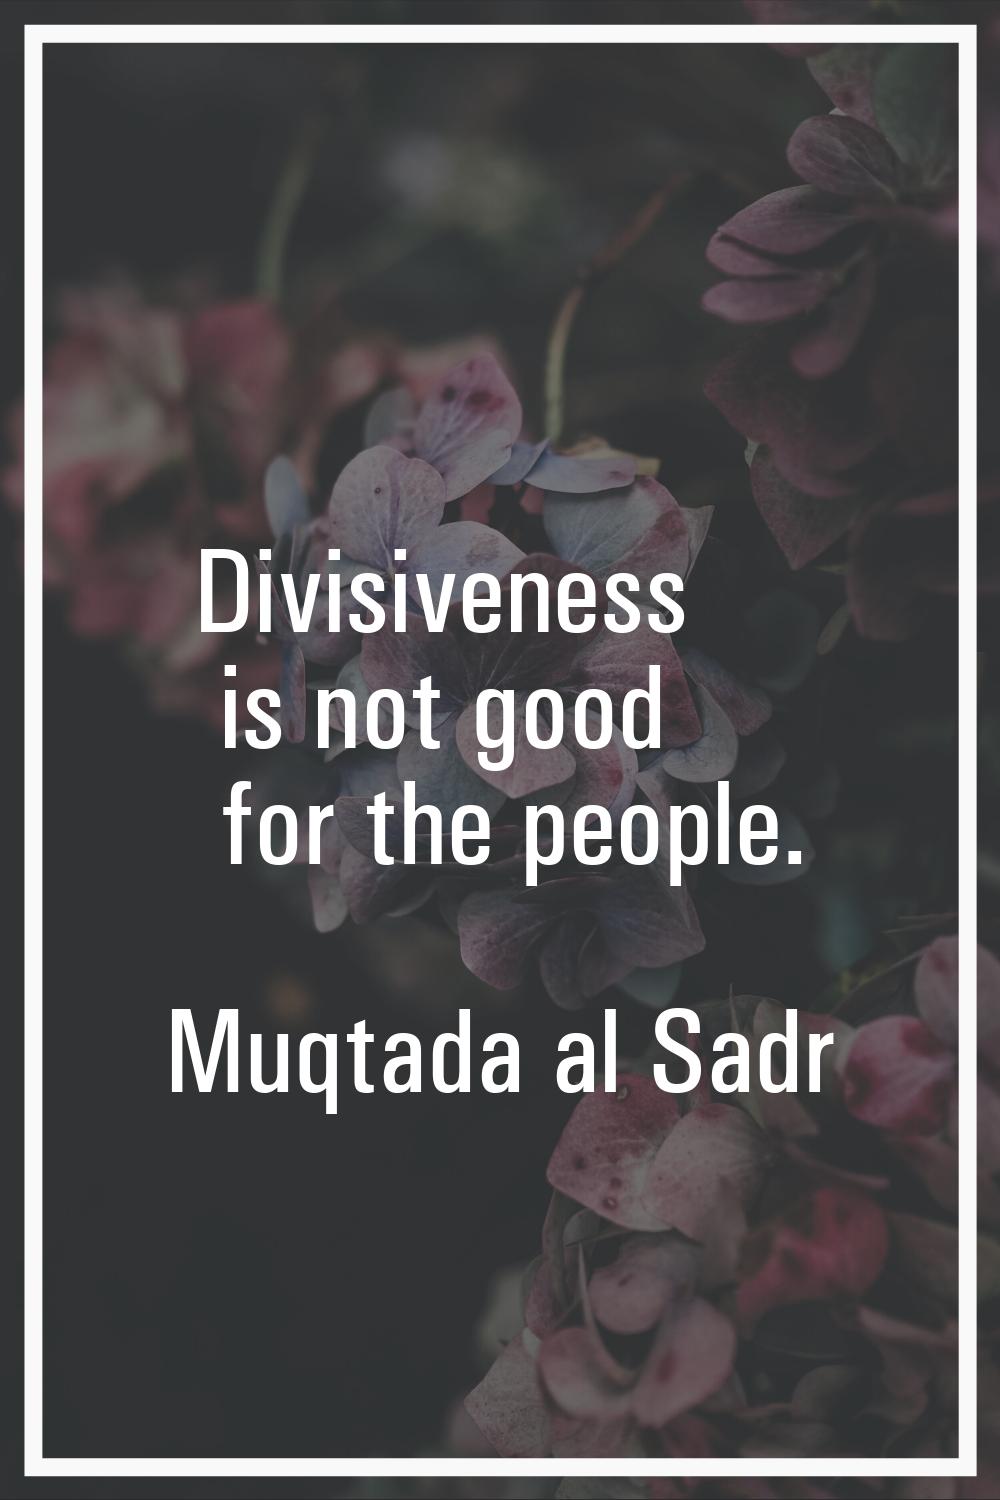 Divisiveness is not good for the people.